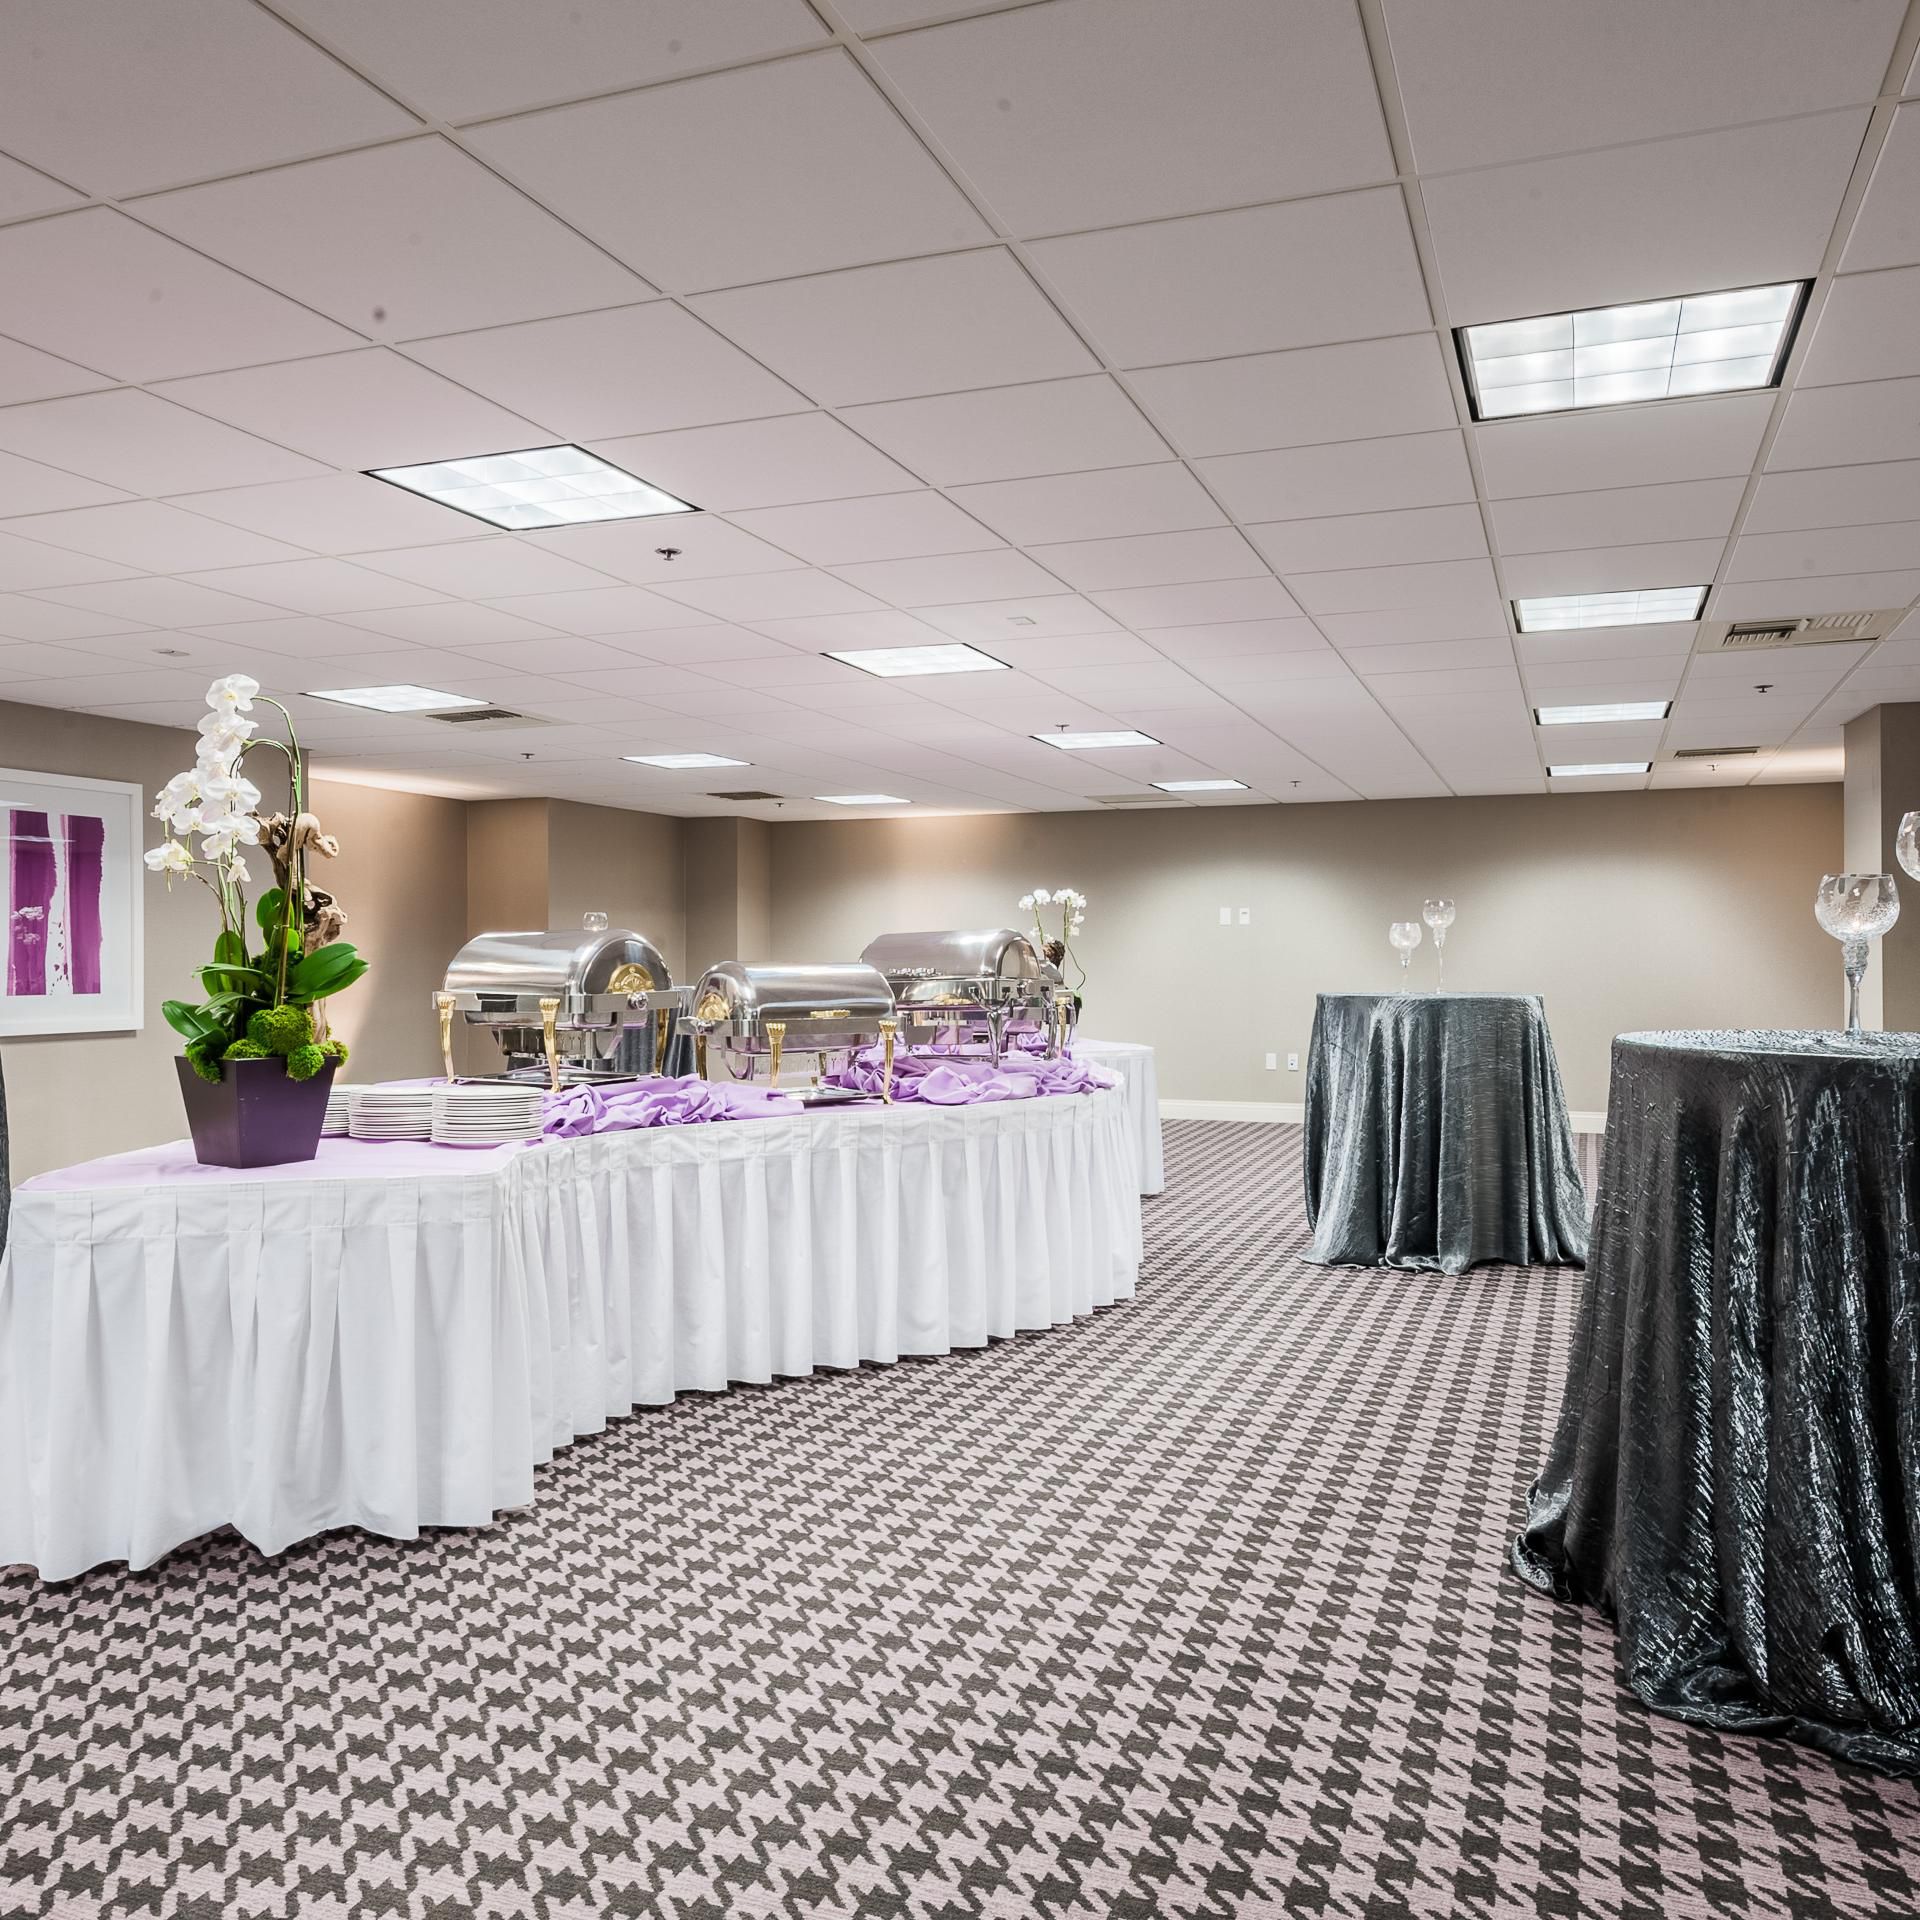 Diamond Room seats up to 80 guests